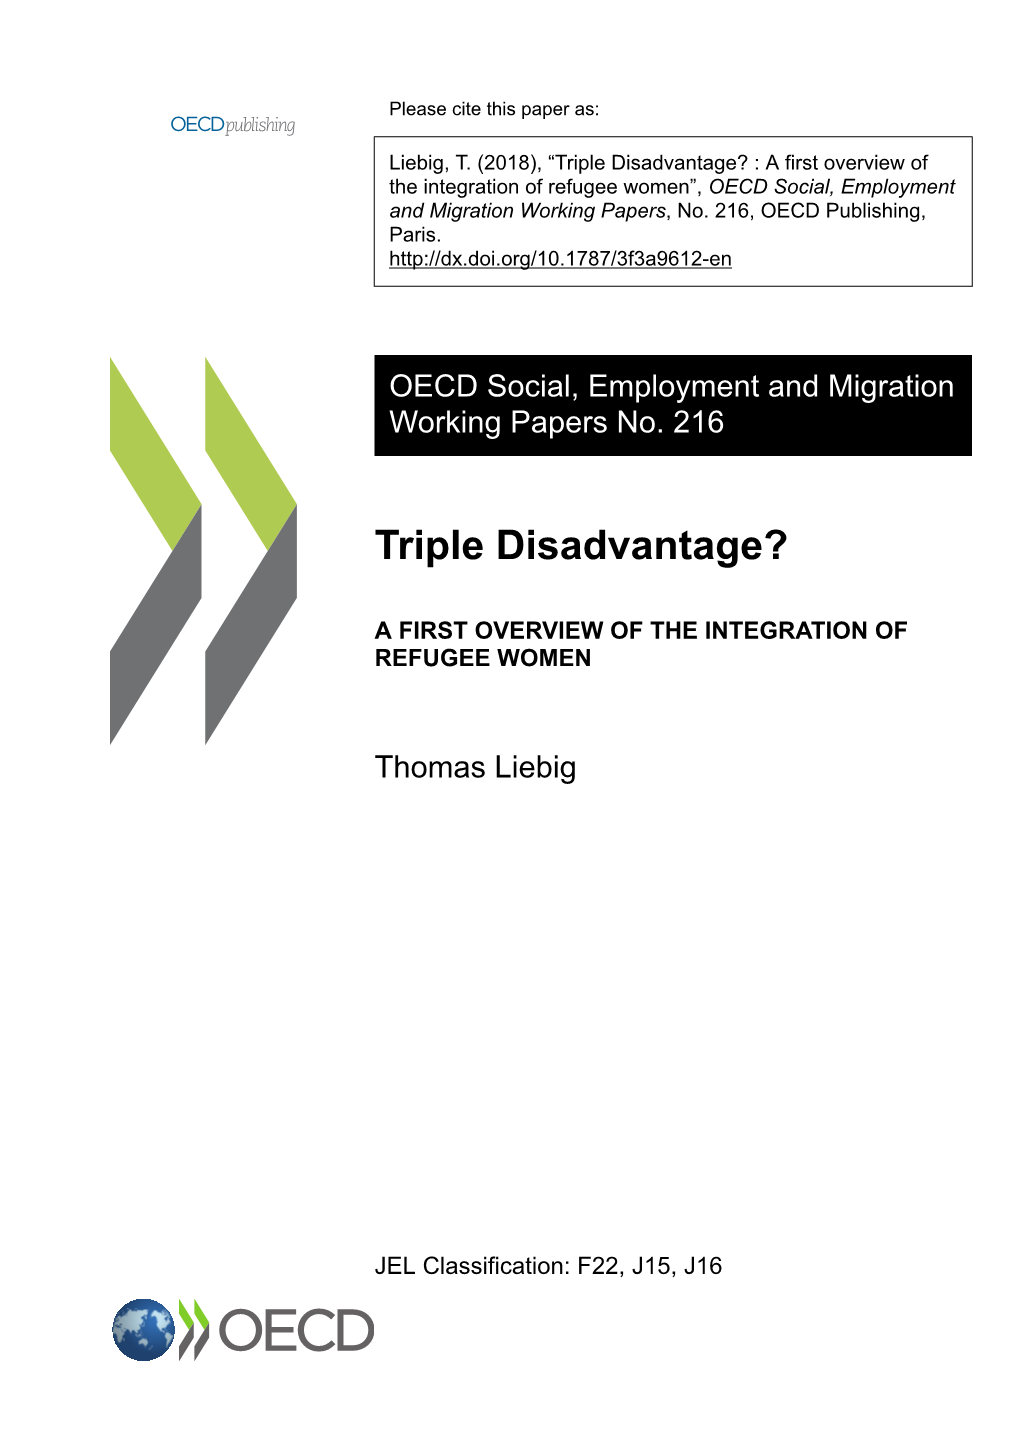 Triple Disadvantage? : a First Overview of the Integration of Refugee Women”, OECD Social, Employment and Migration Working Papers, No